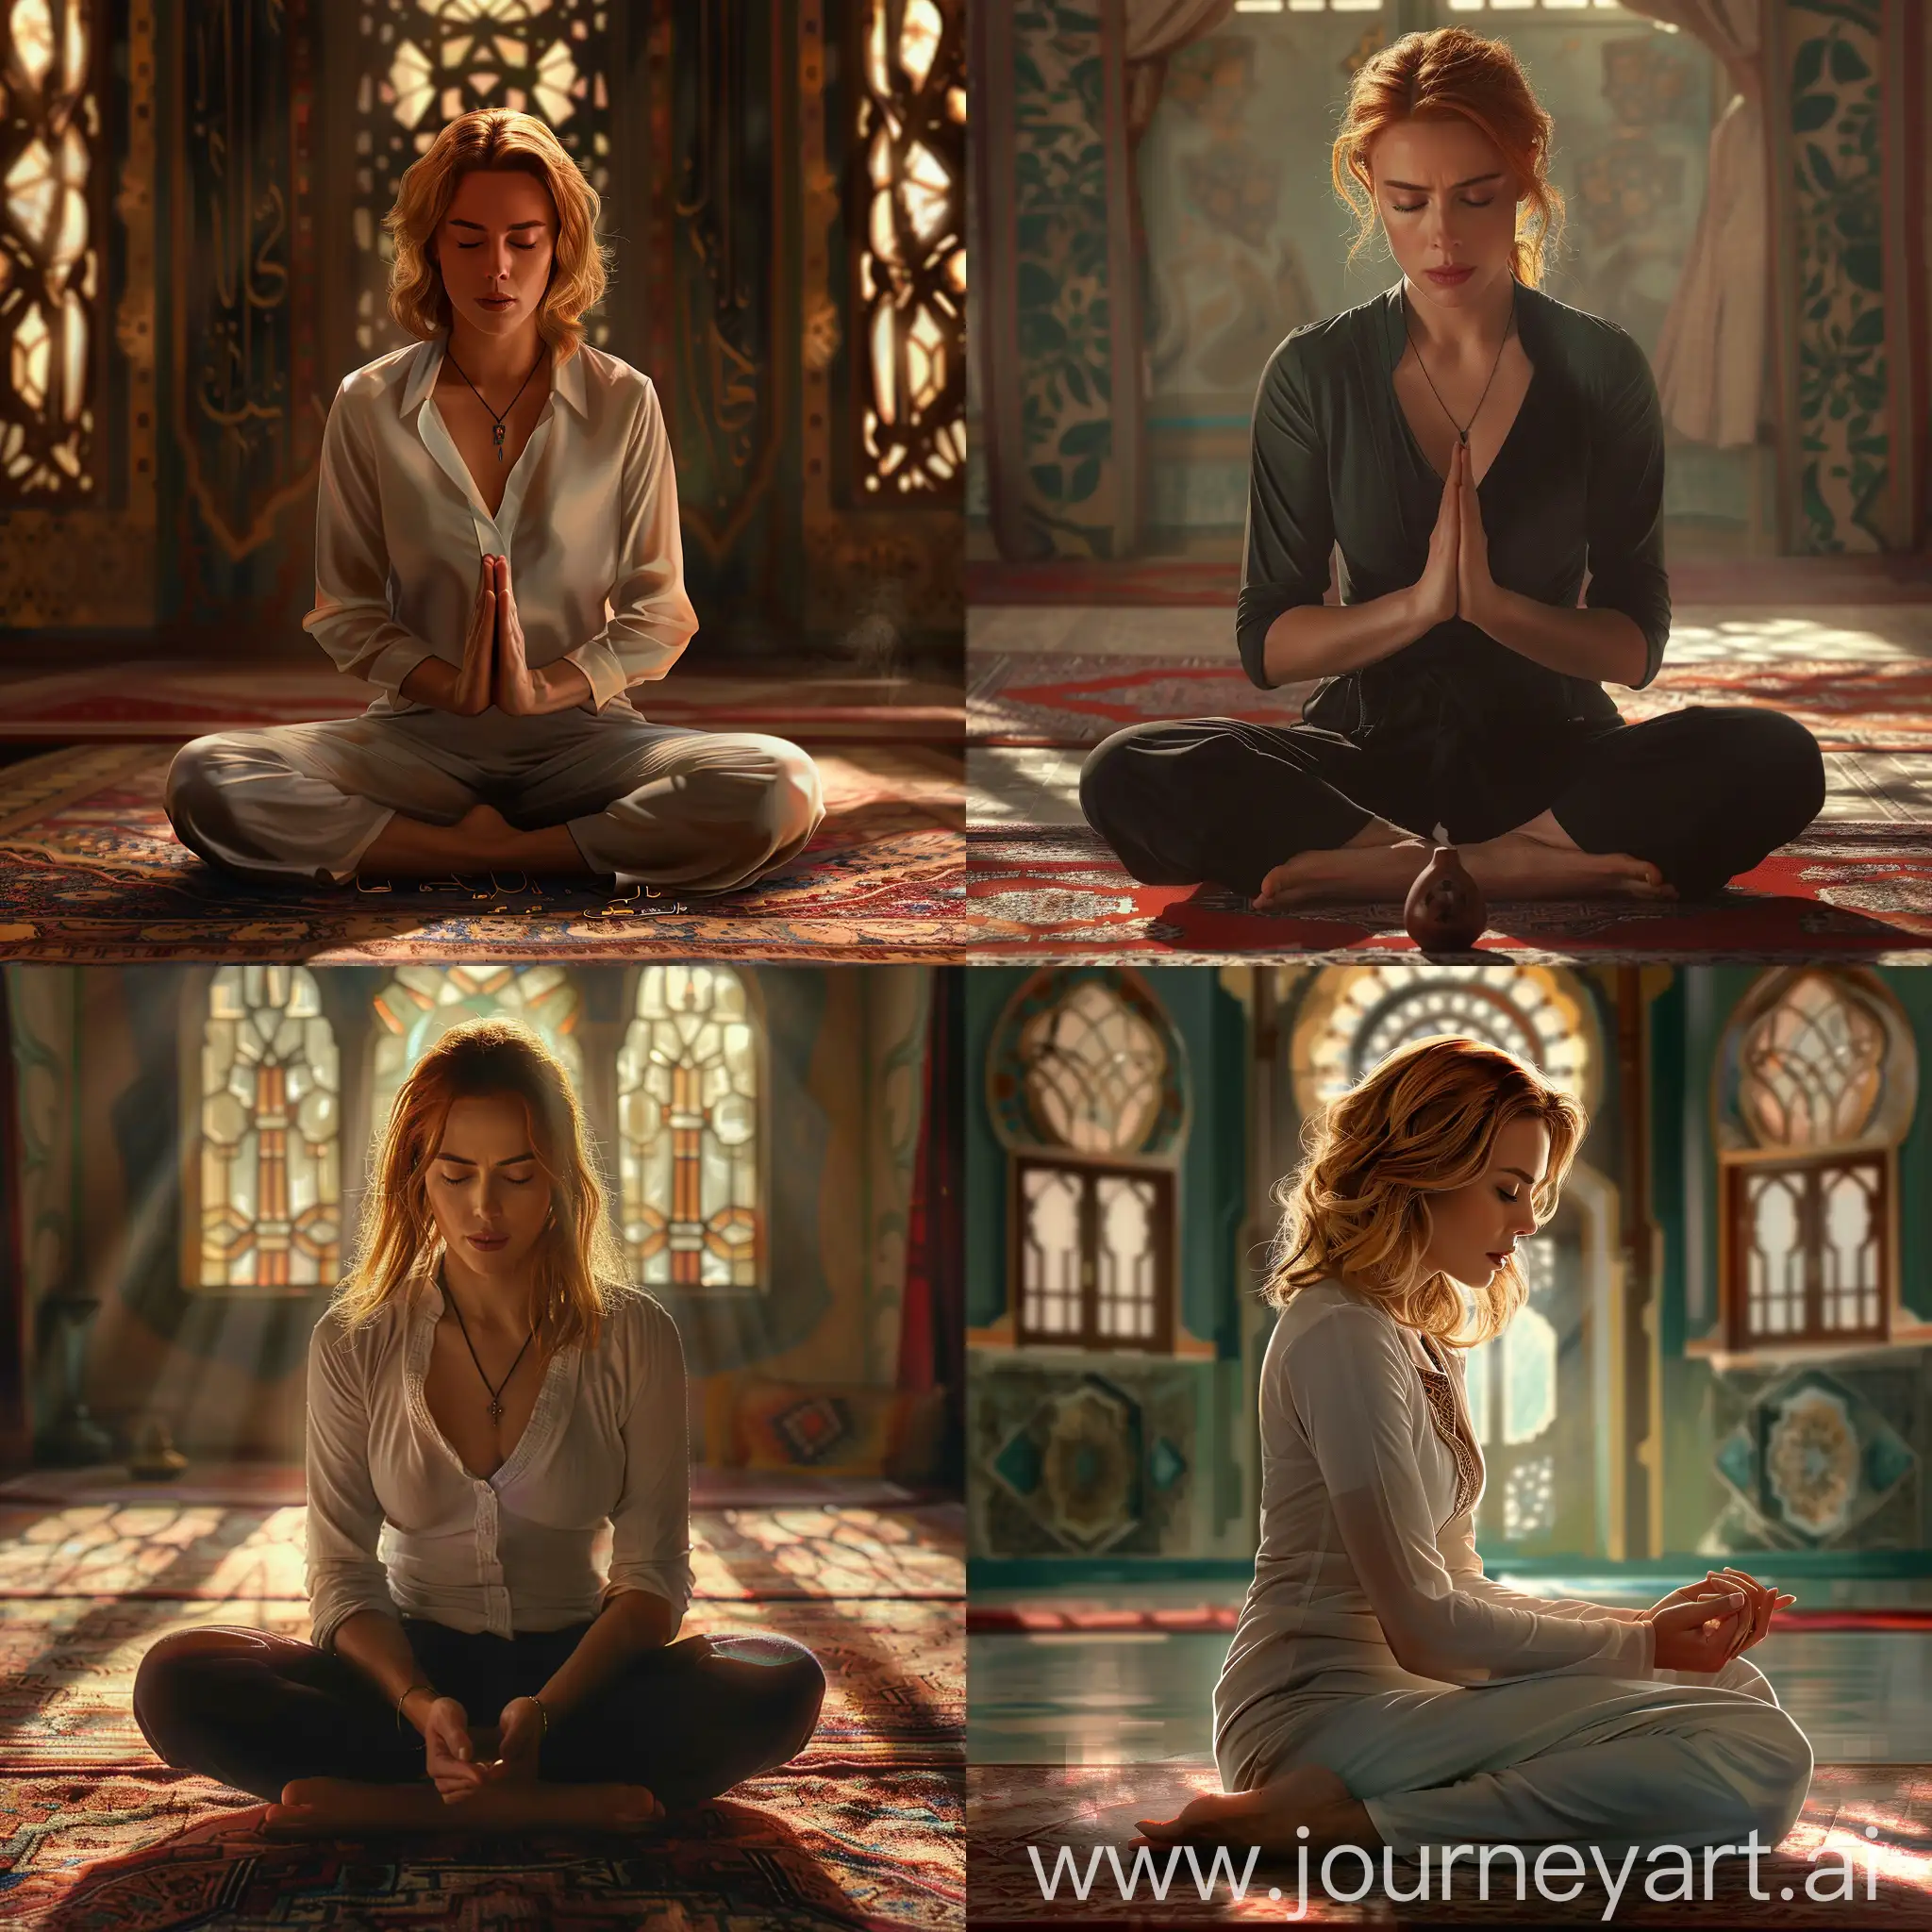 "Generate an AI image depicting Scarlett Johansson in a scene where she respectfully performs the act of namaz (Islamic prayer), emphasizing a serene atmosphere and cultural inclusivity. Ensure the portrayal is respectful and considerate of diverse perspectives."





